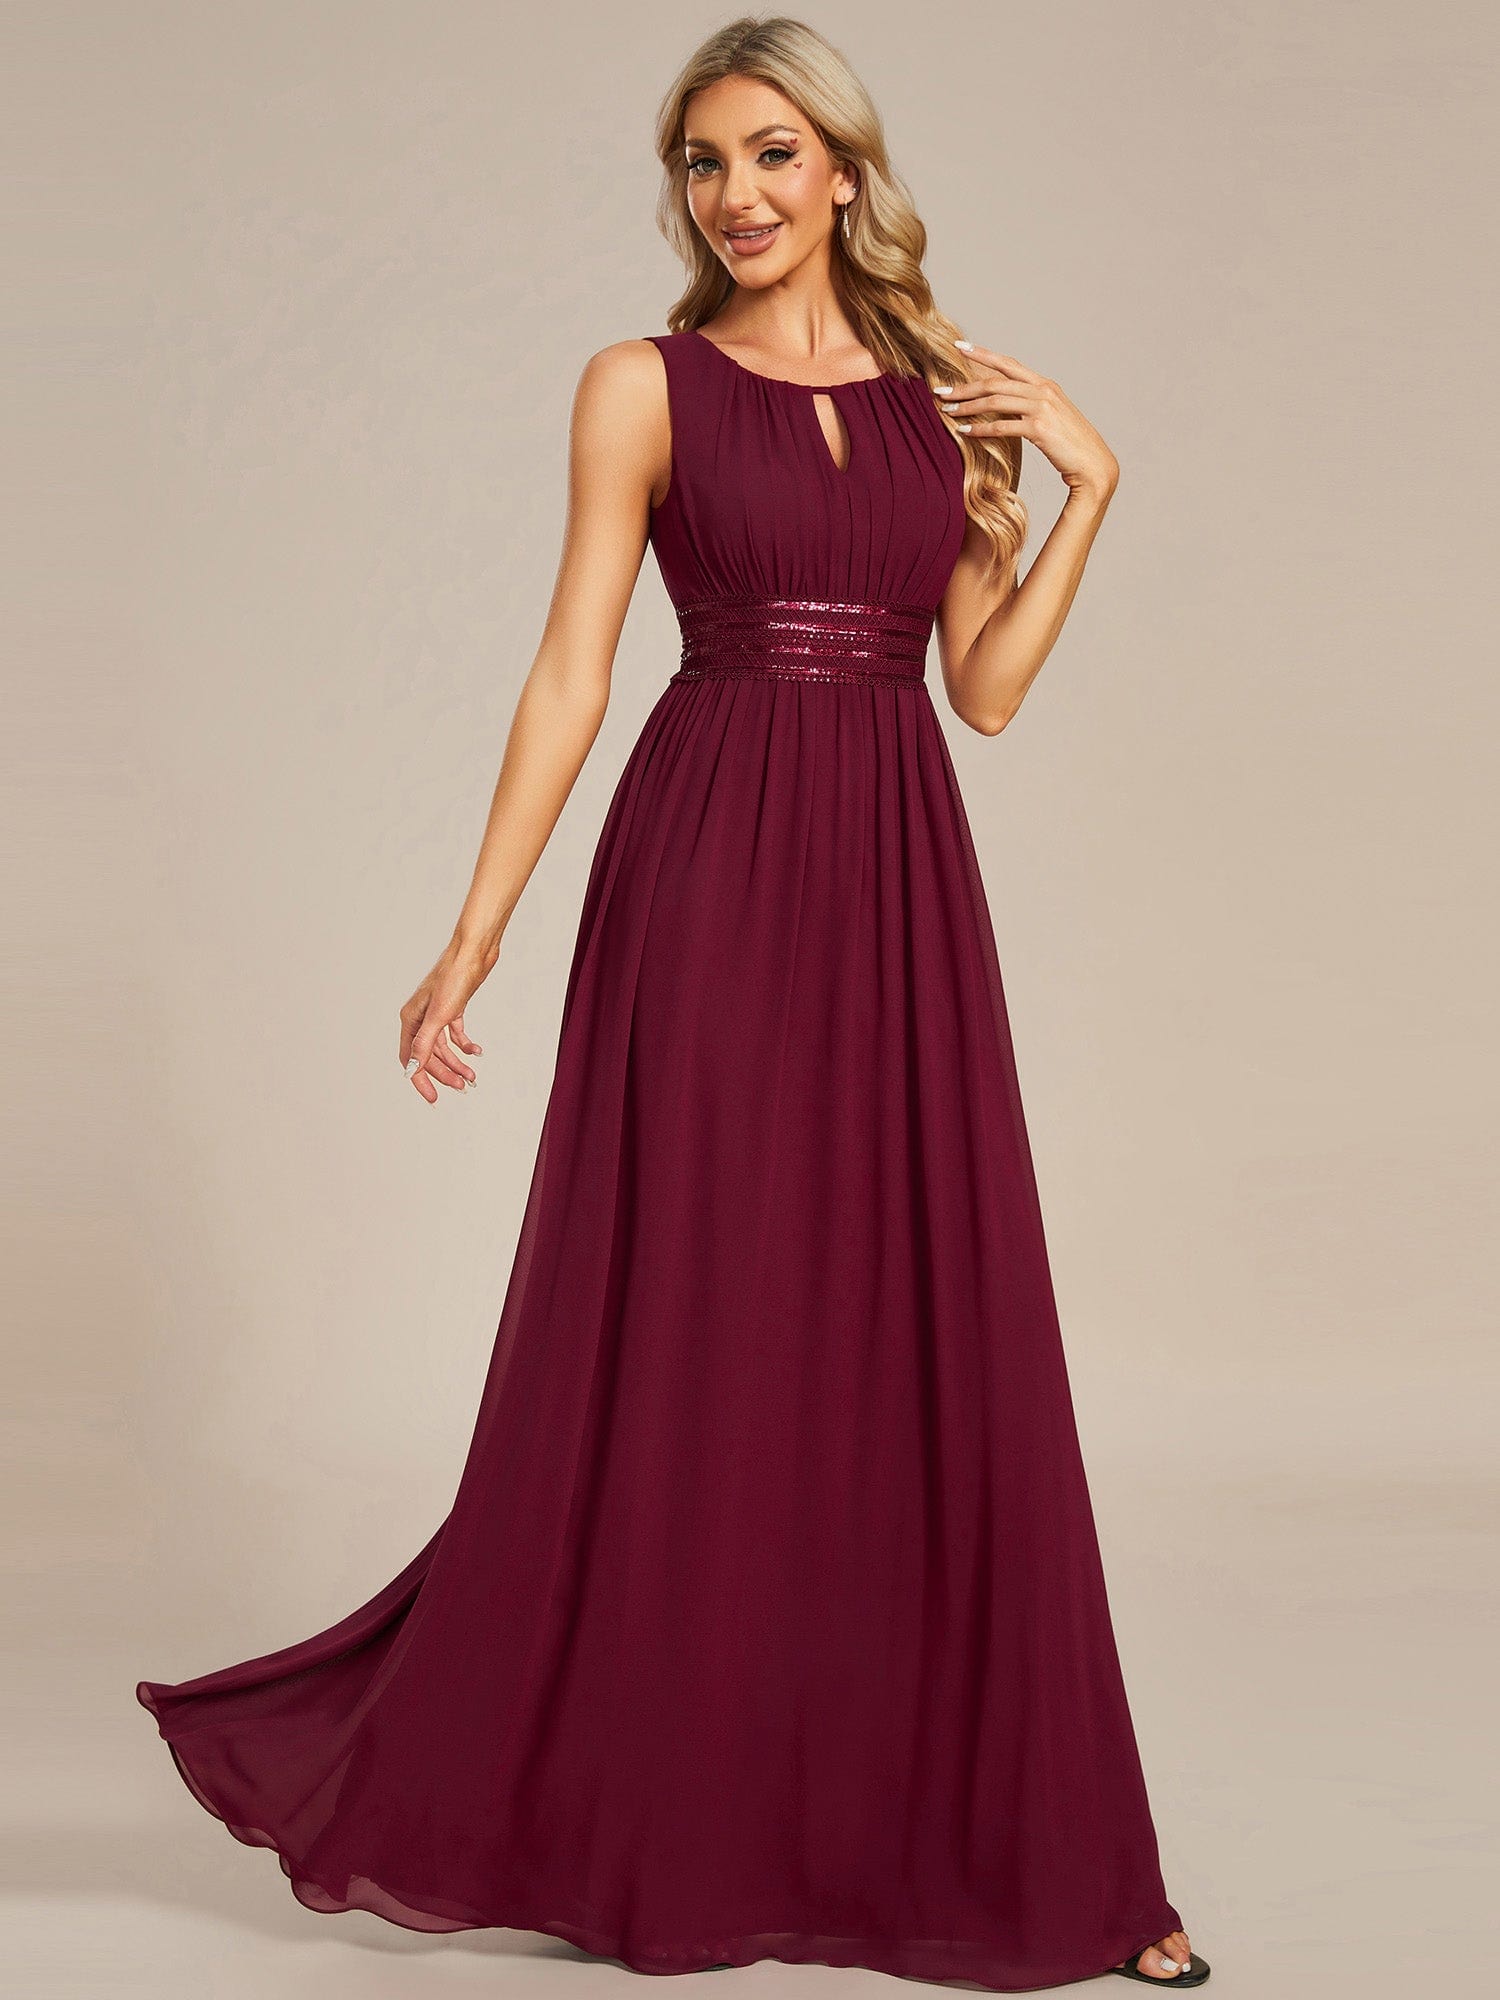 Simple Sleeveless A-line Chiffon Bridesmaid Dress with Hollow Out Detail #color_Burgundy